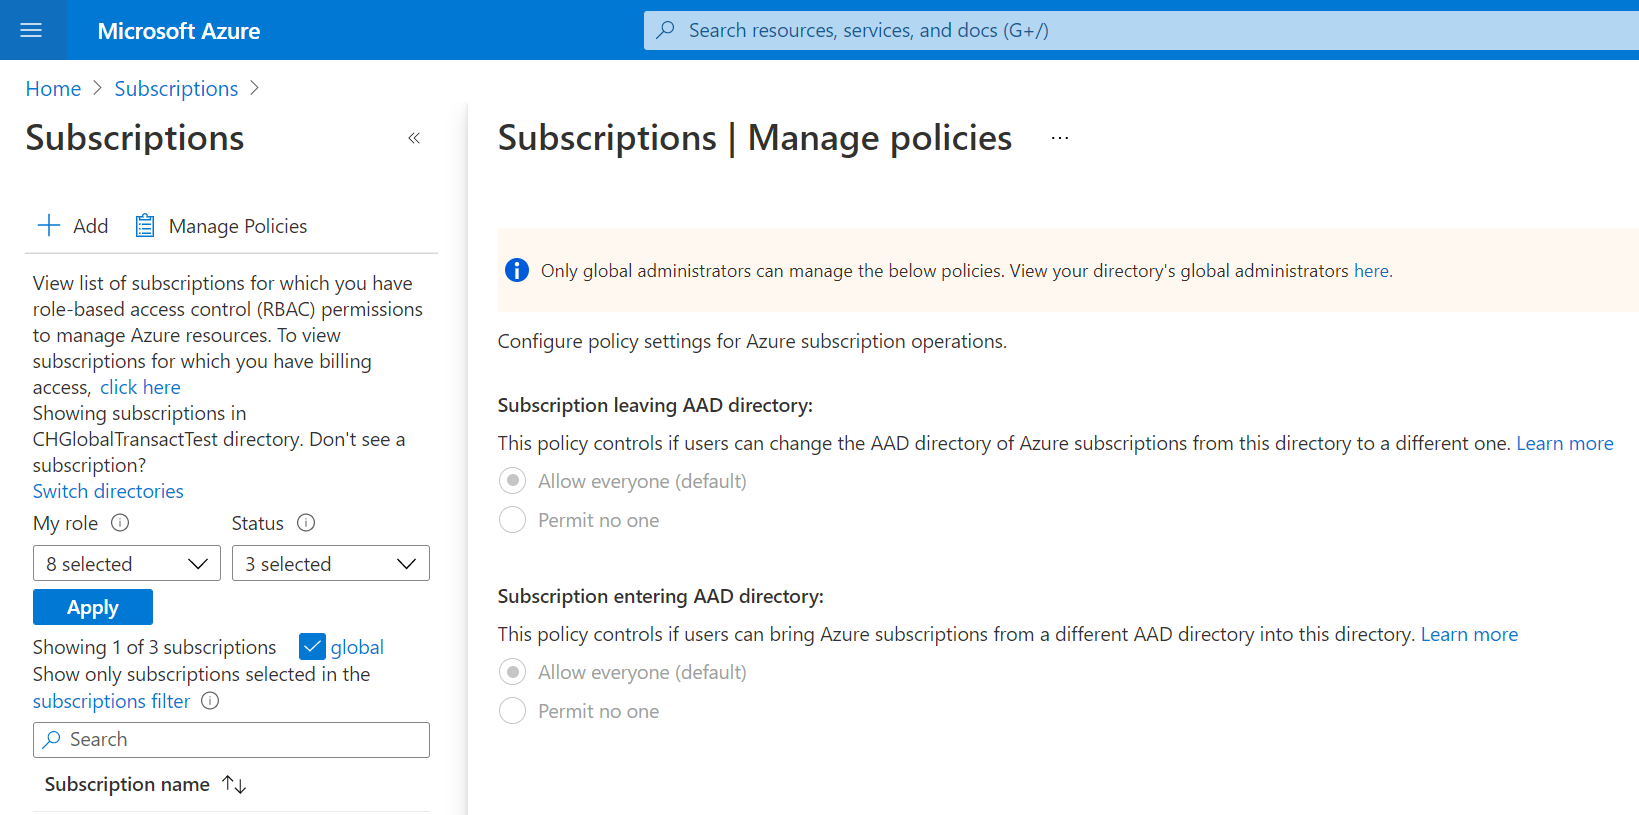 Screenshot showing the Manage policies in Subscriptions as a reader.